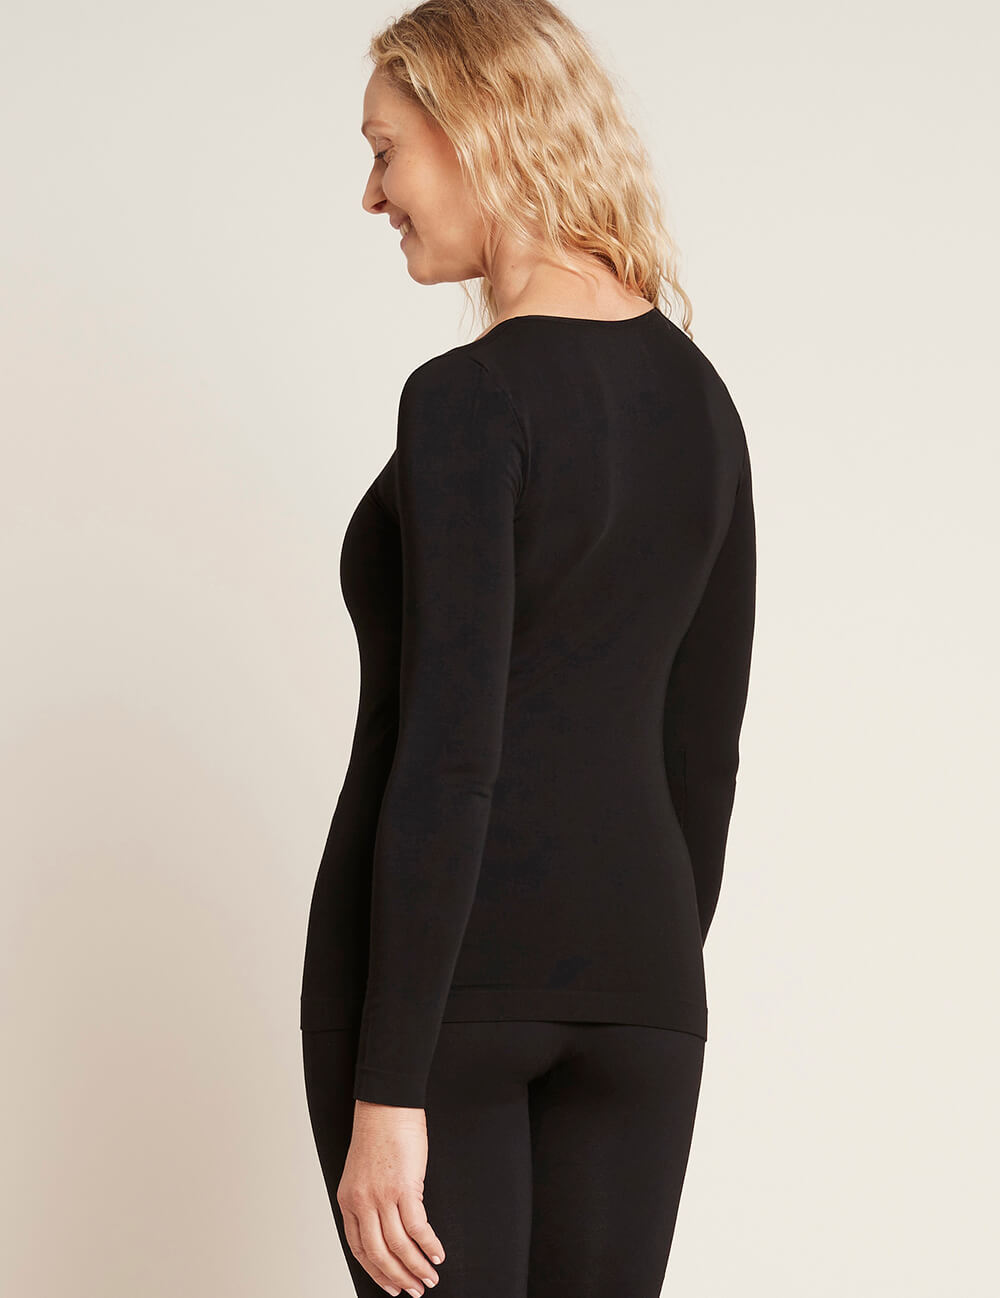 Boody Bamboo Women's Long Sleeve Top in Black Back View